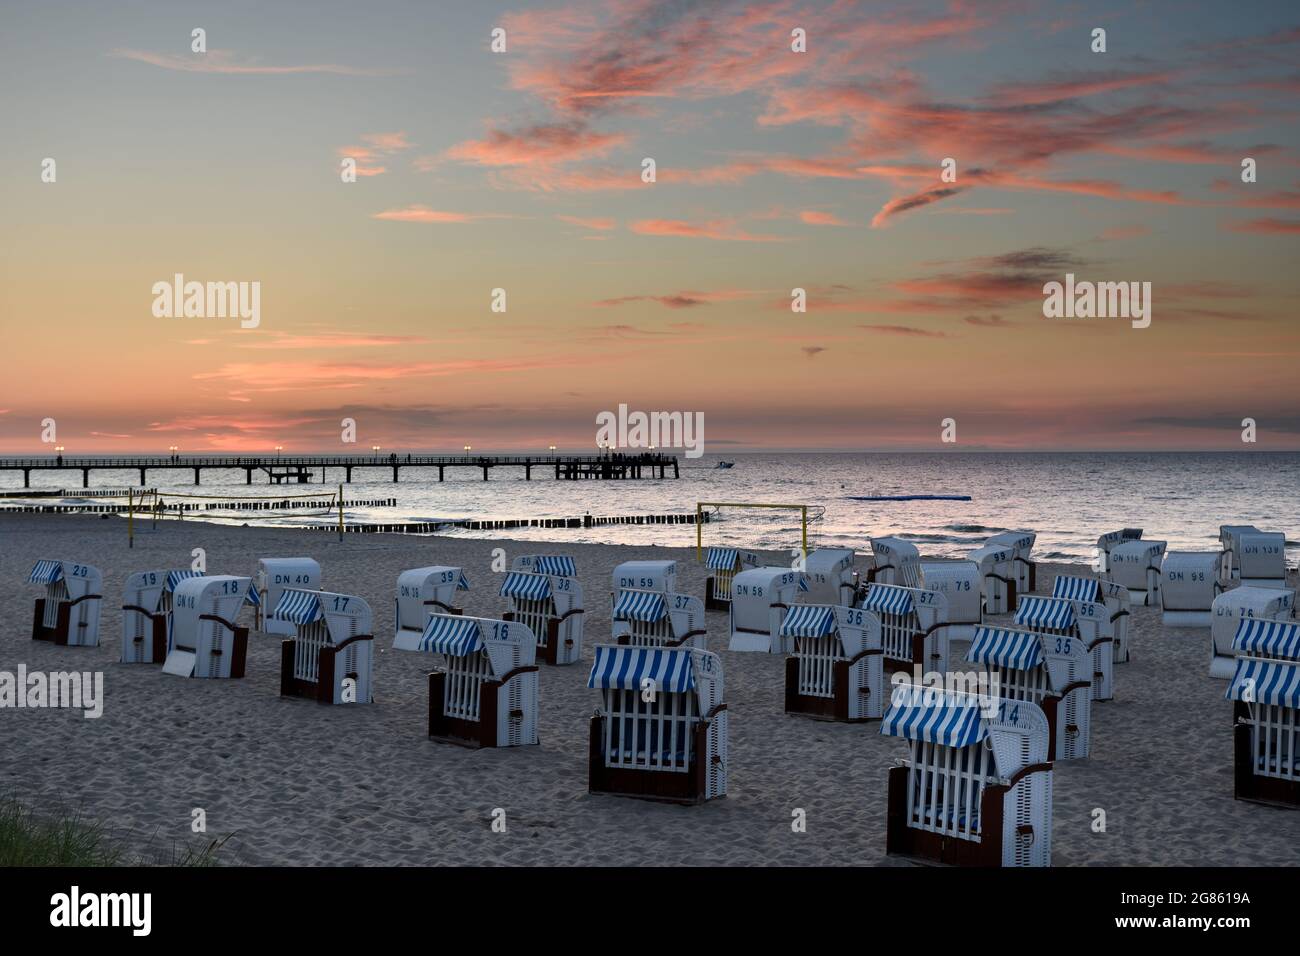 Kuehlungsborn, Germany, Baltic Sea coast: evening atmosphere and sunset at the beach and pier Stock Photo